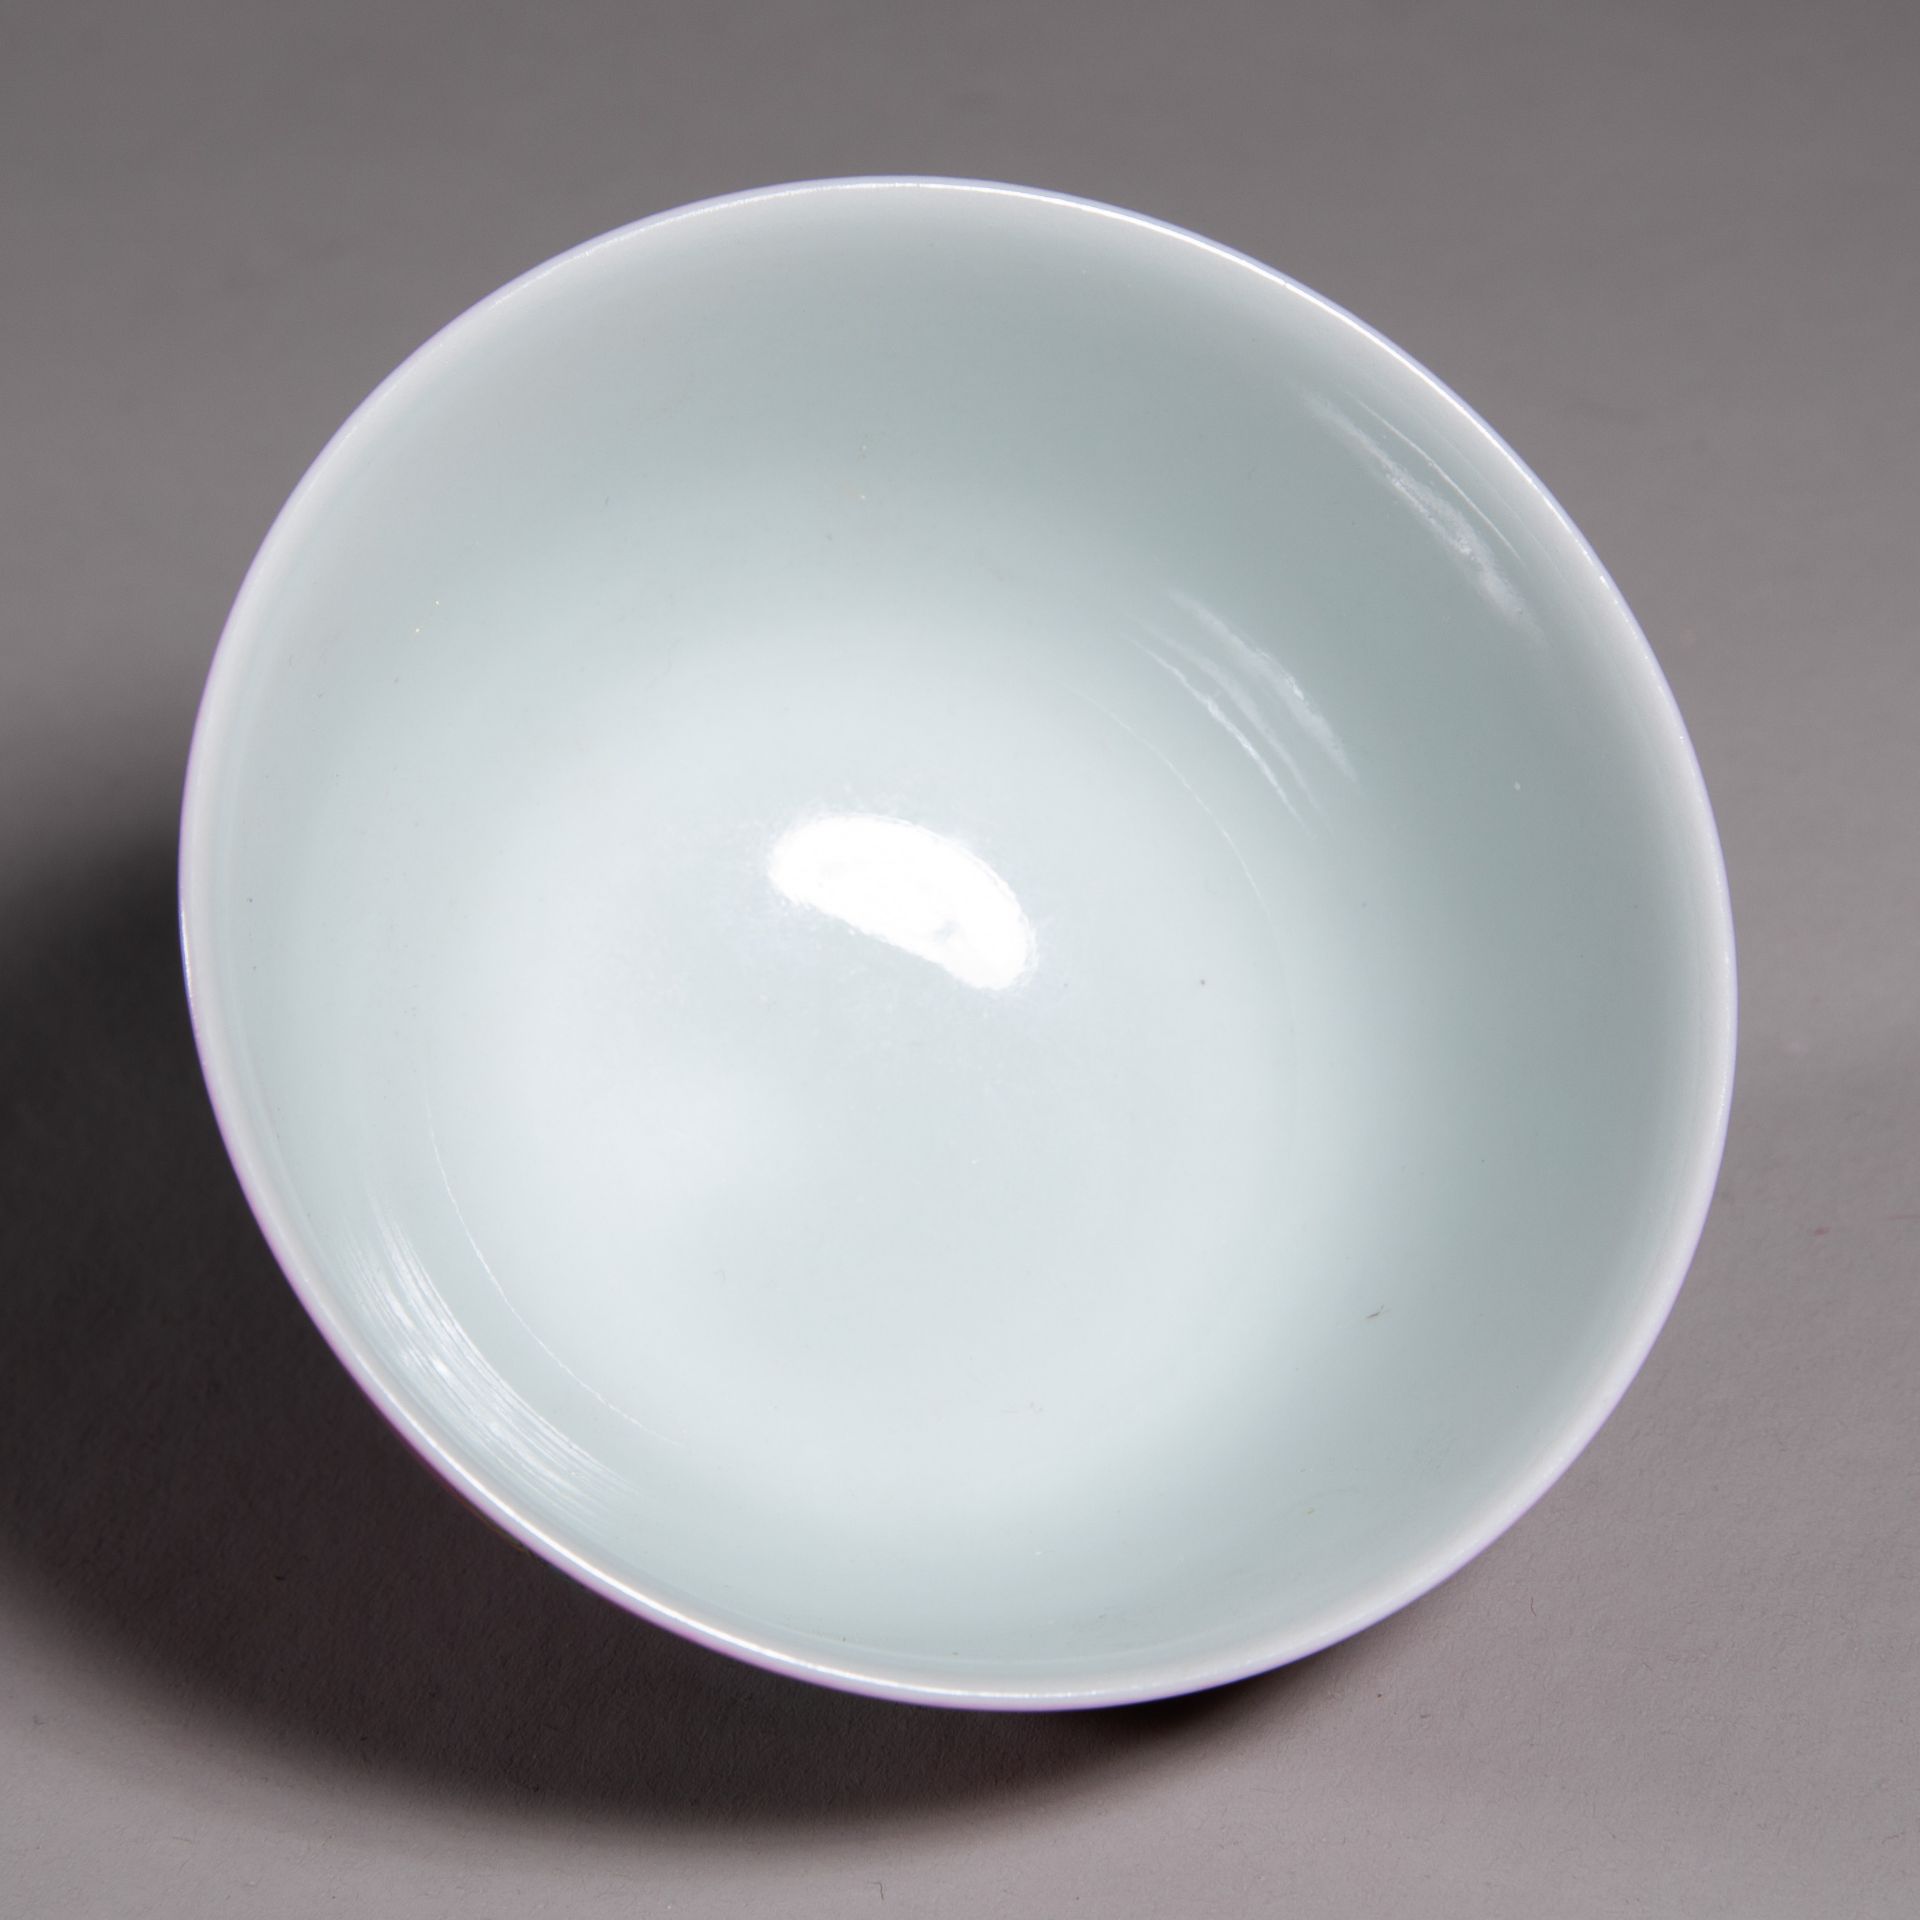 A set of Yongzheng pastel bowls from Qing dynasty - Image 6 of 7